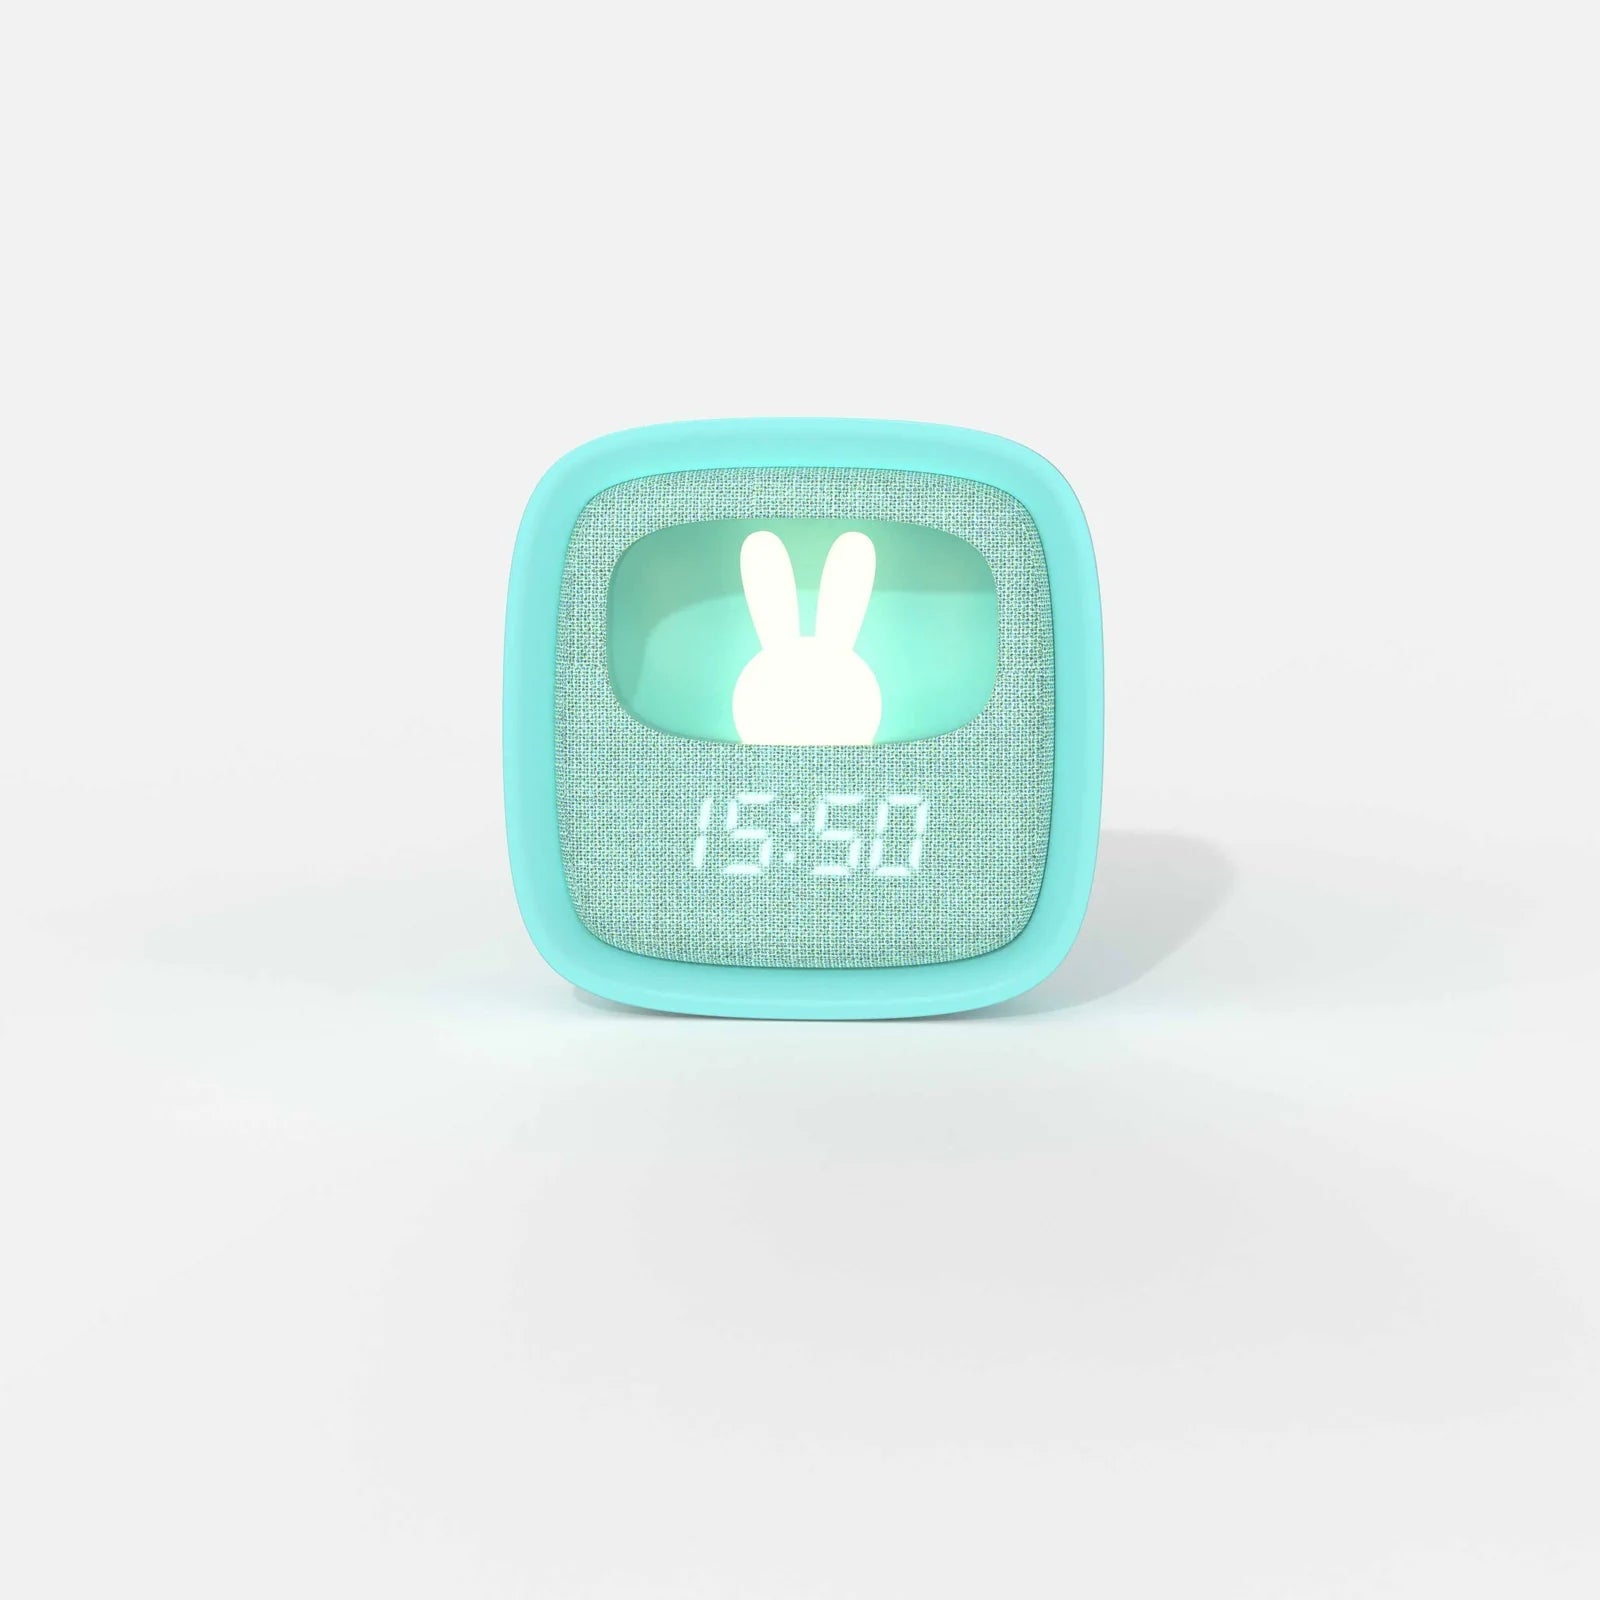 reveil billy clock turquoise - MOB / MOBILITY ON BOARD BILLY-BL-01 3701365601204